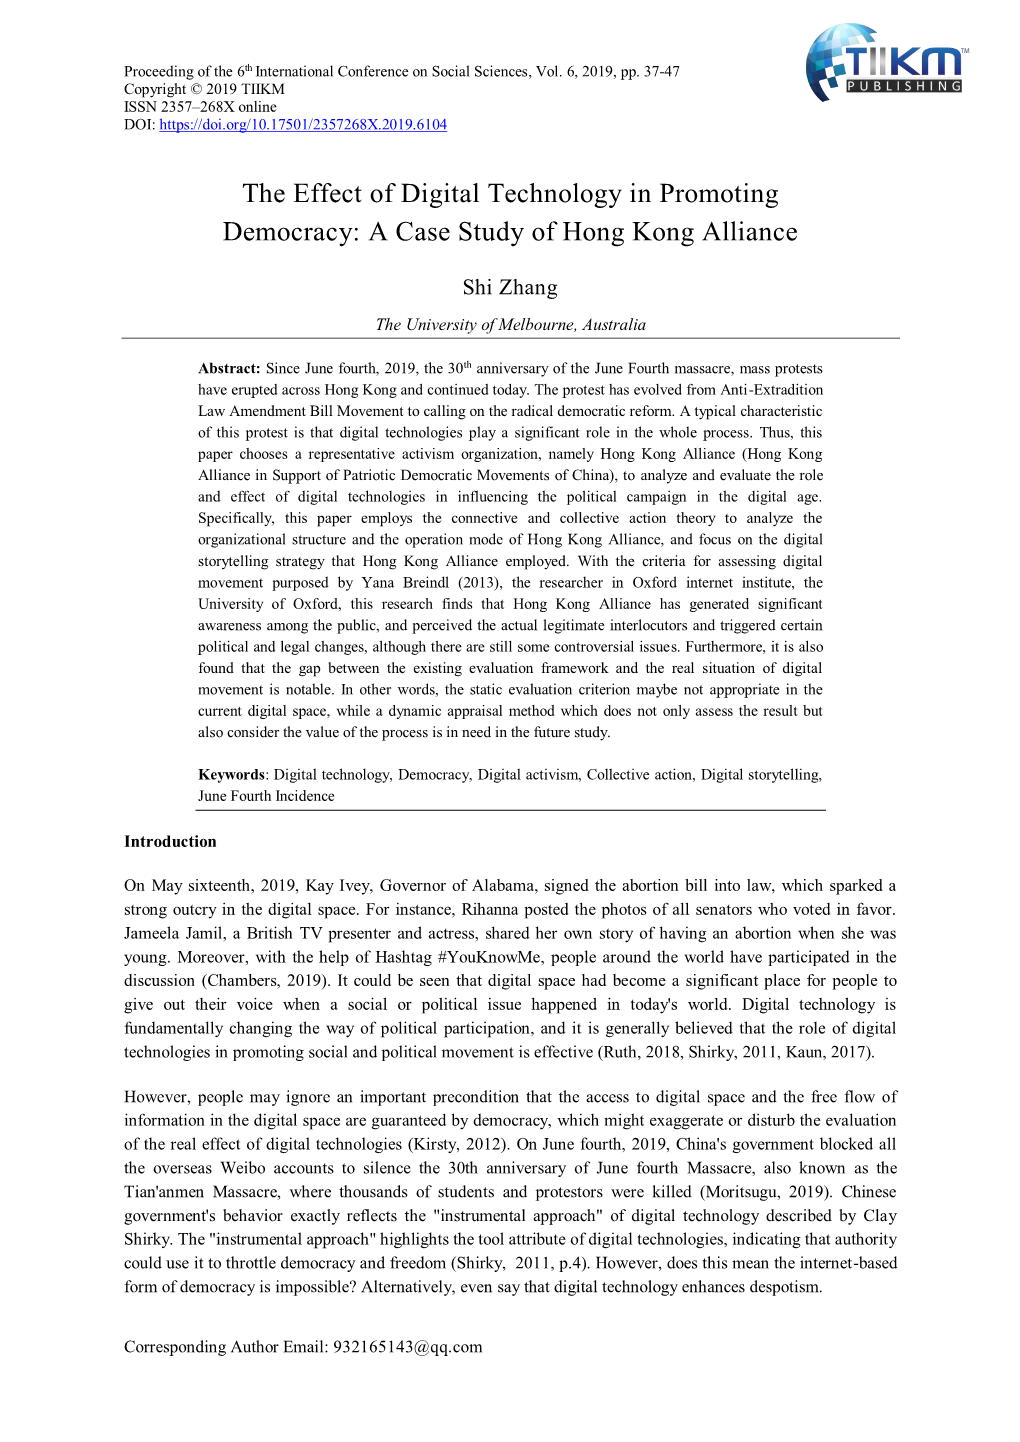 The Effect of Digital Technology in Promoting Democracy: a Case Study of Hong Kong Alliance